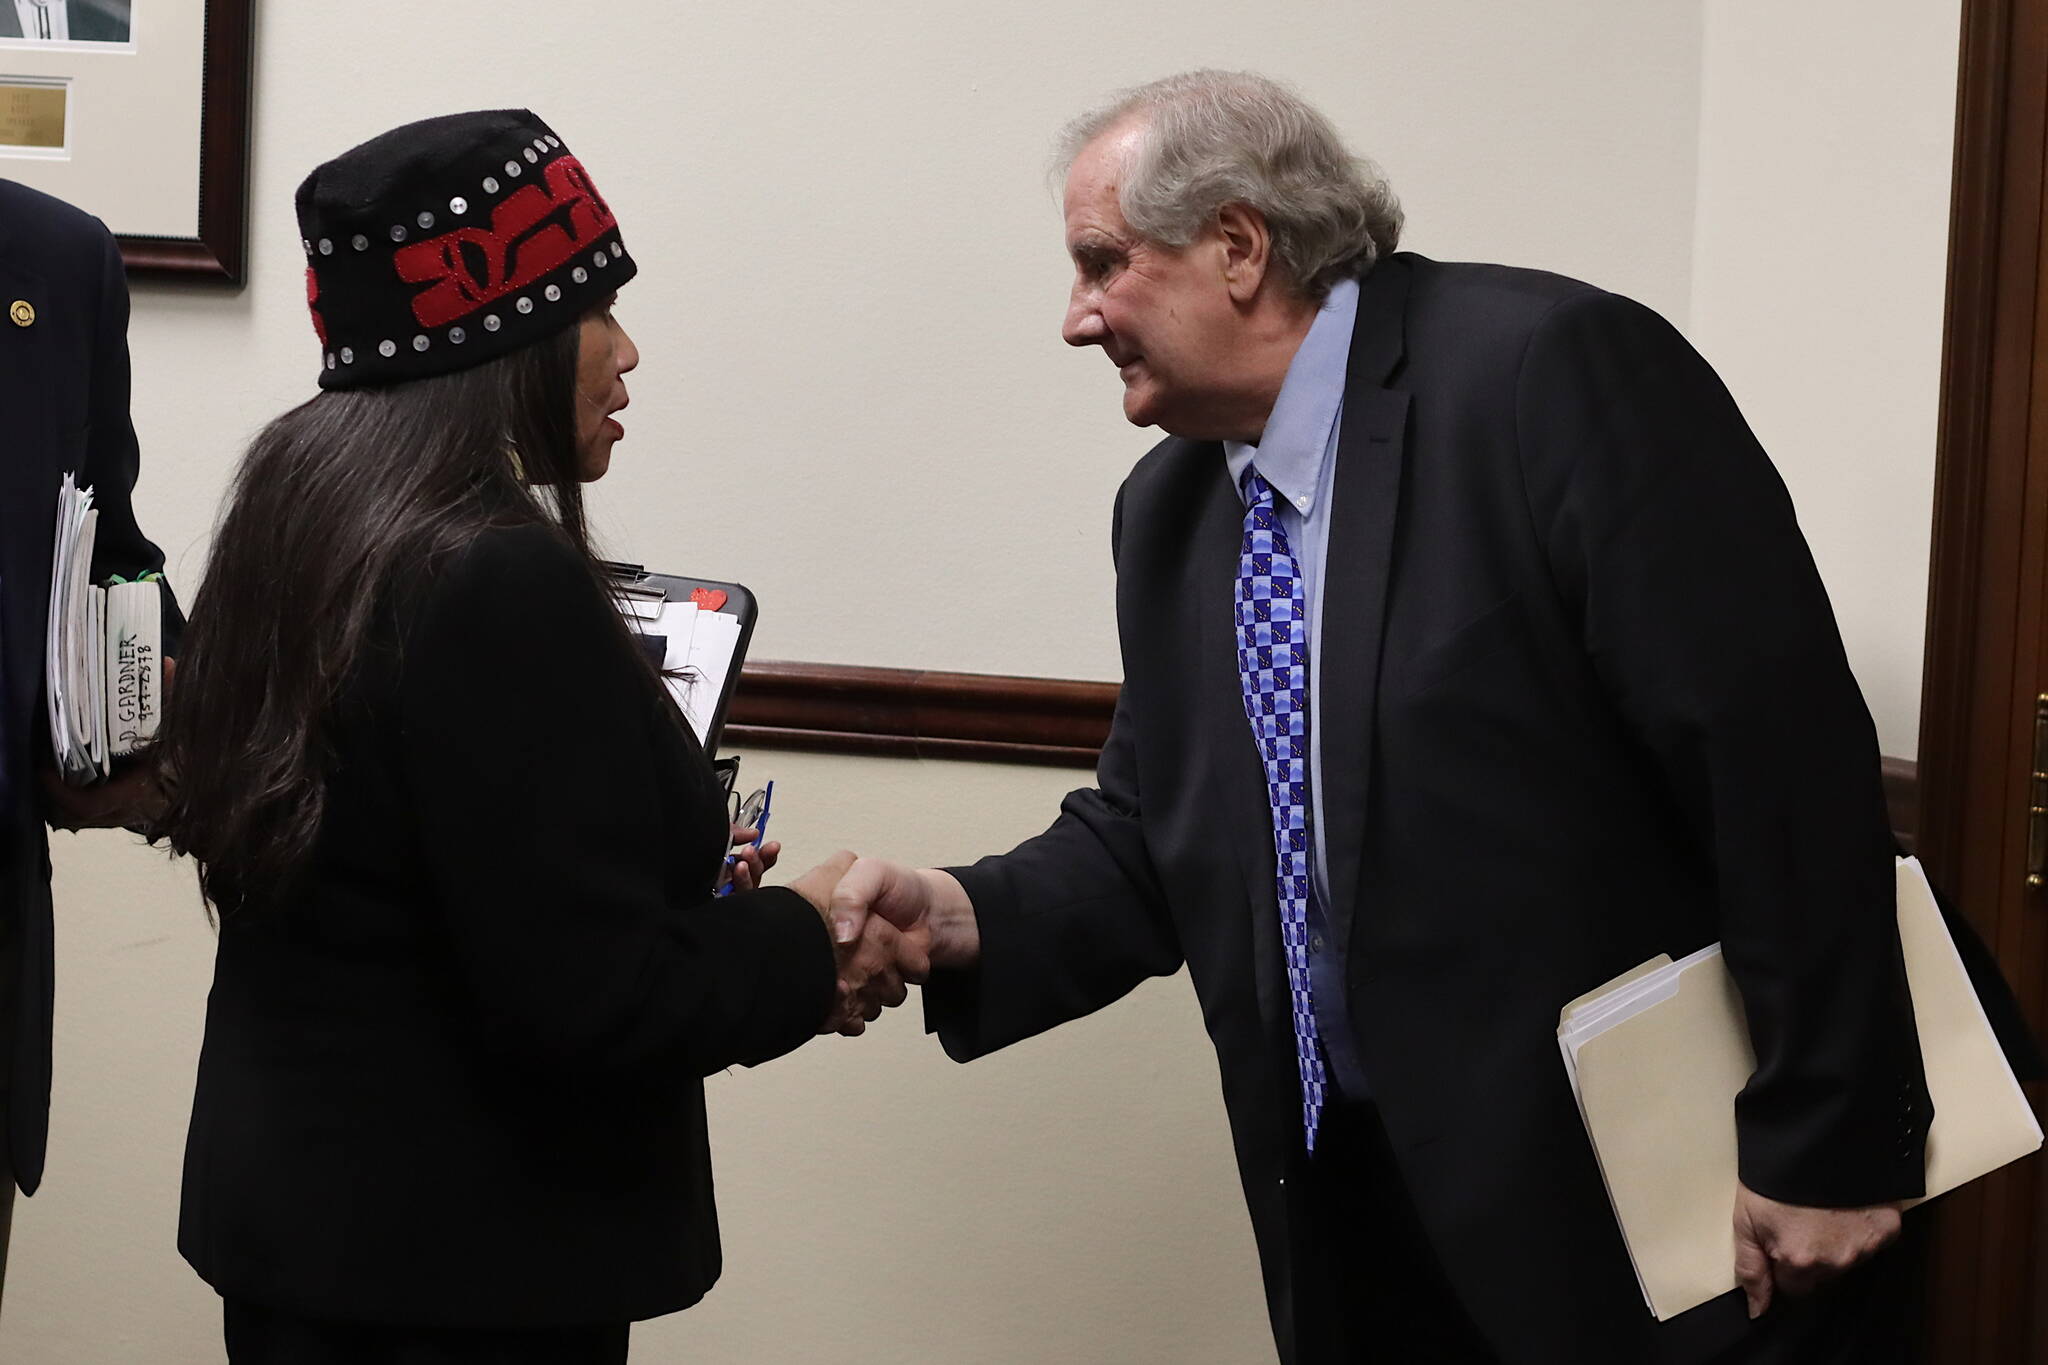 Paulette M. Moreno, left, a former grand president of the Alaska Native Sisterhood greets Alaska Supreme Court Chief Justice Daniel Winfree after his State of the Judiciary speech on Wednesday at the Alaska State Capitol. The chief justice spent a prolonged period after the speech in the hallway outside the House chamber greeting lawmakers and people in the audience who attended the speech. (Mark Sabbatini / Juneau Empire)